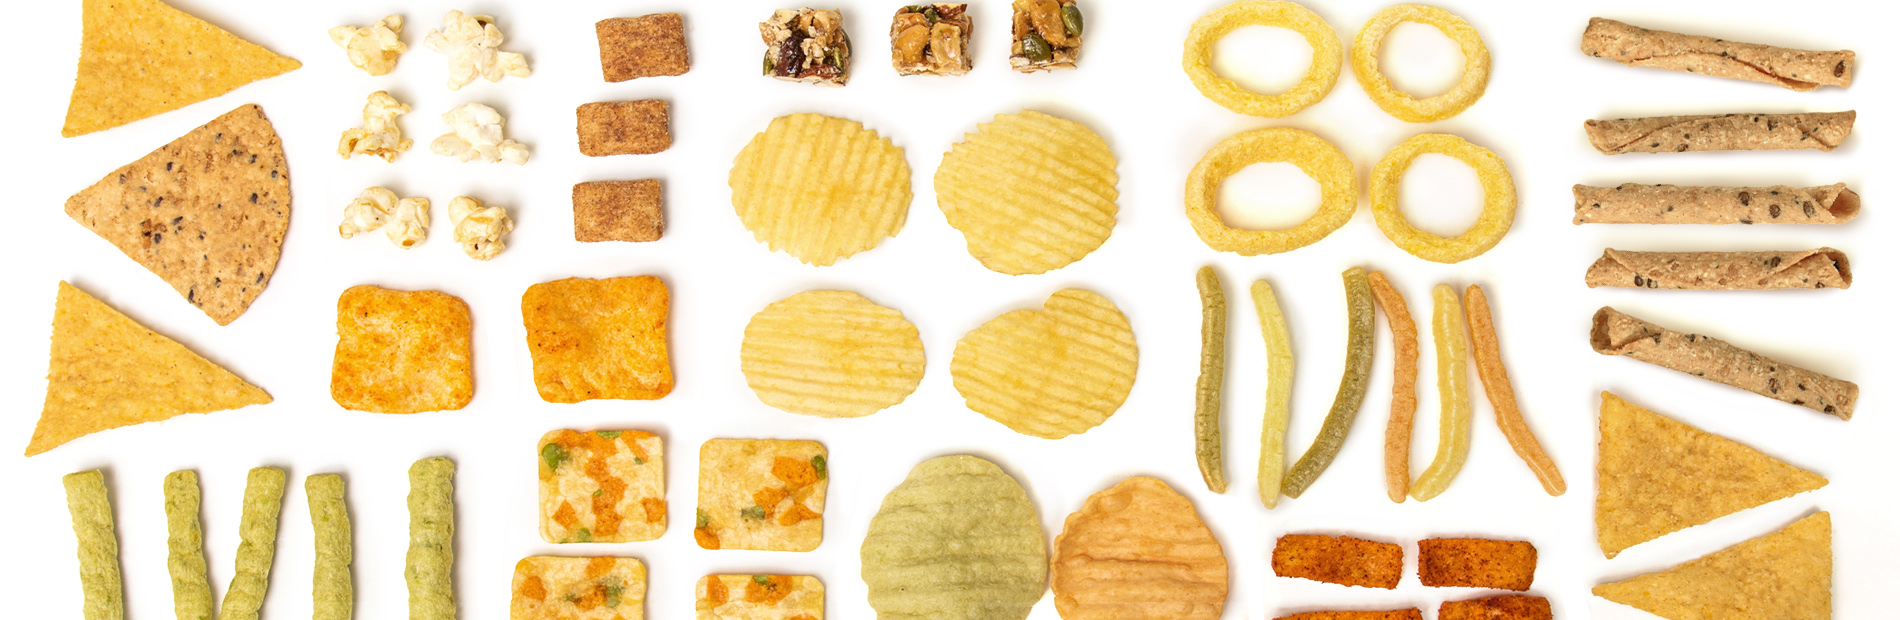 diverse range of snack products